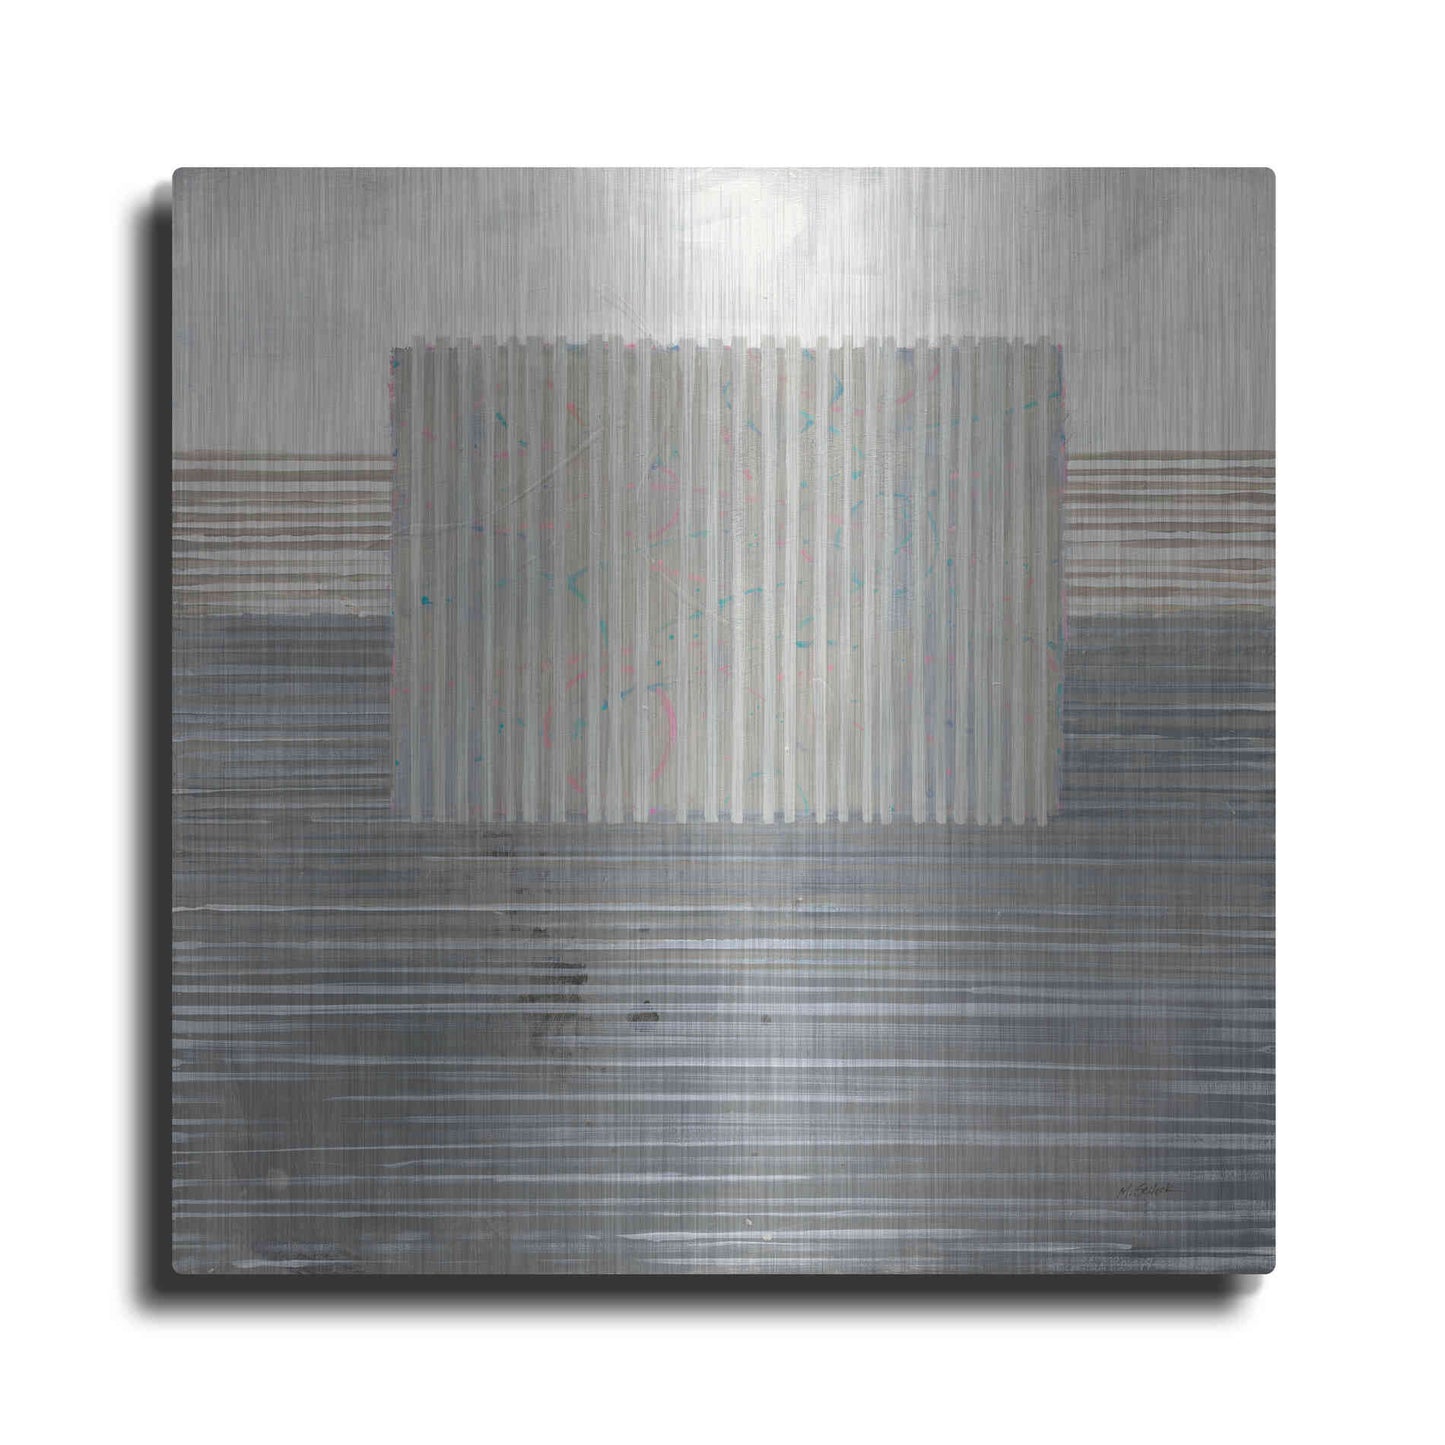 Luxe Metal Art 'Layers Of Reality' by Mike Schick, Metal Wall Art